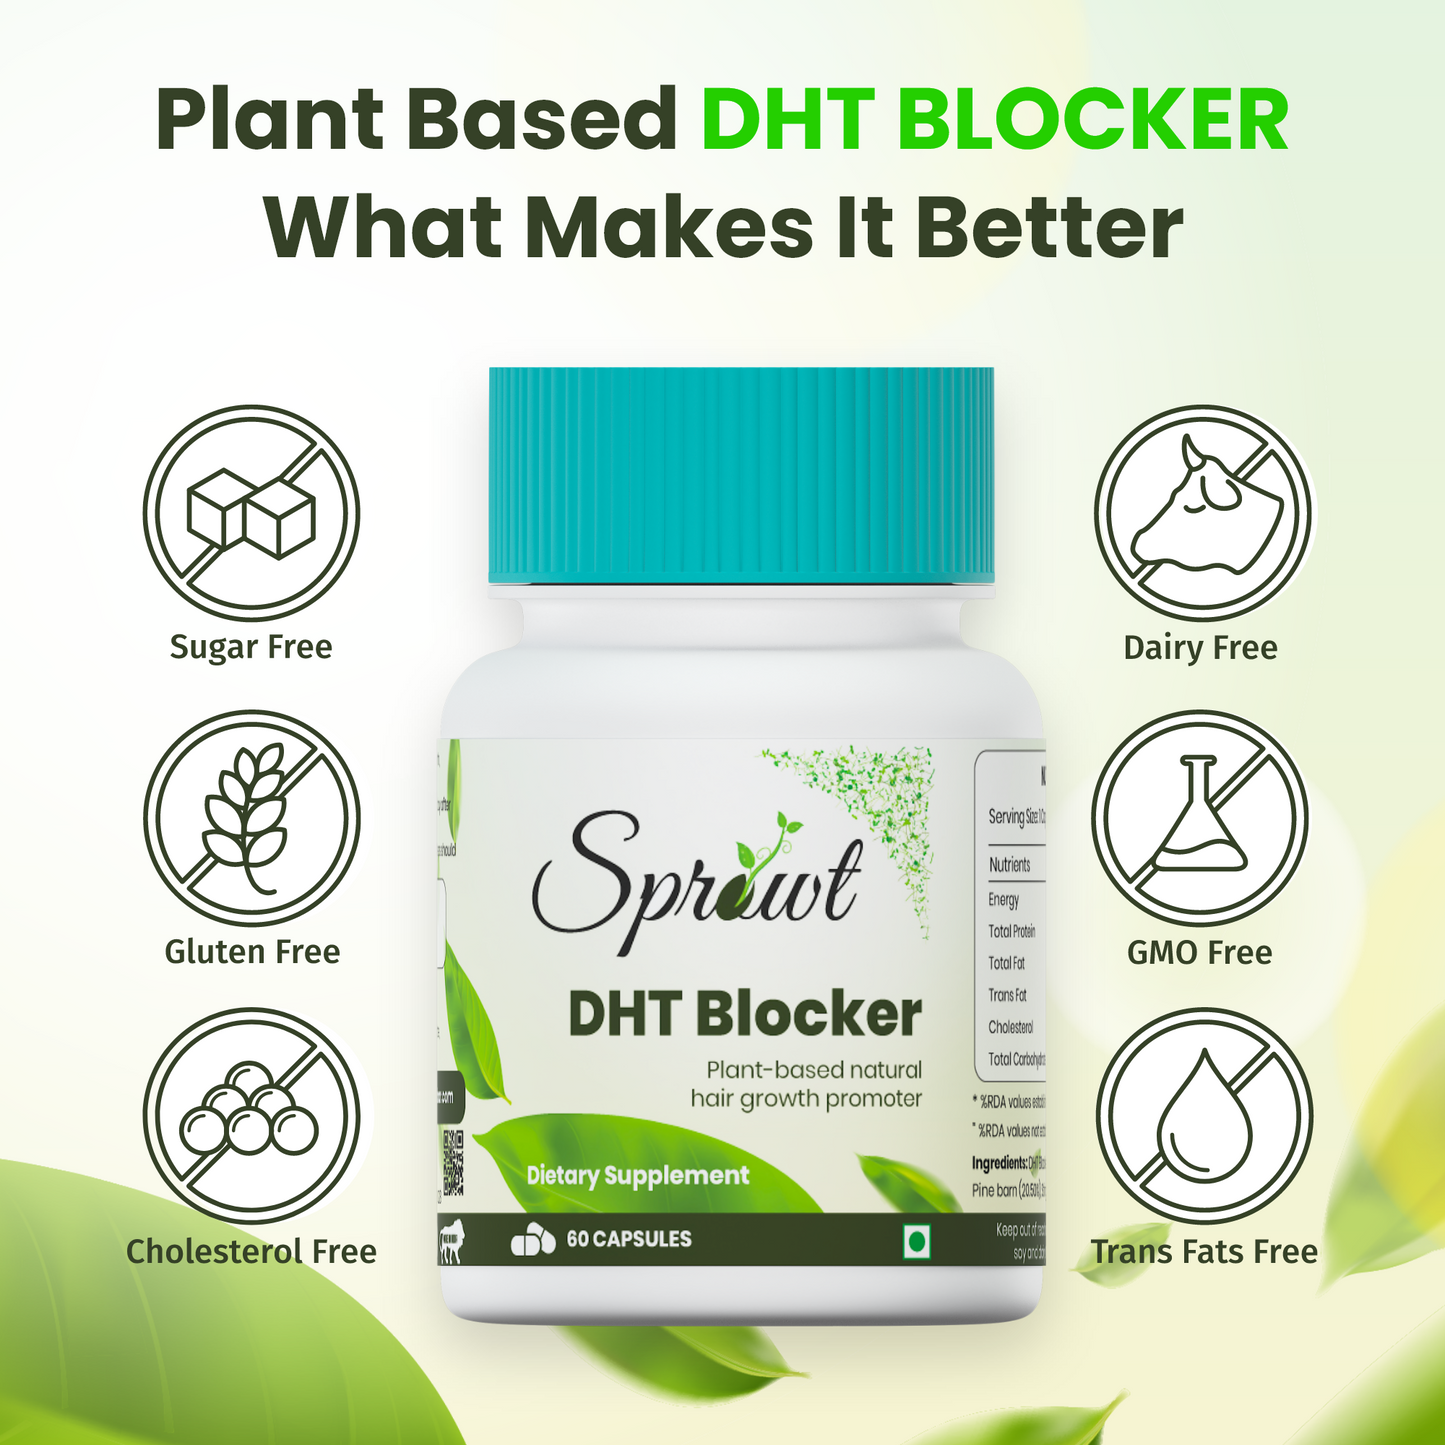 Sprowt Plant Based DHT Blocker Capsule for Hair Growth, Helps Reduce Hair Fall | Pack of 3, 60 Capsules